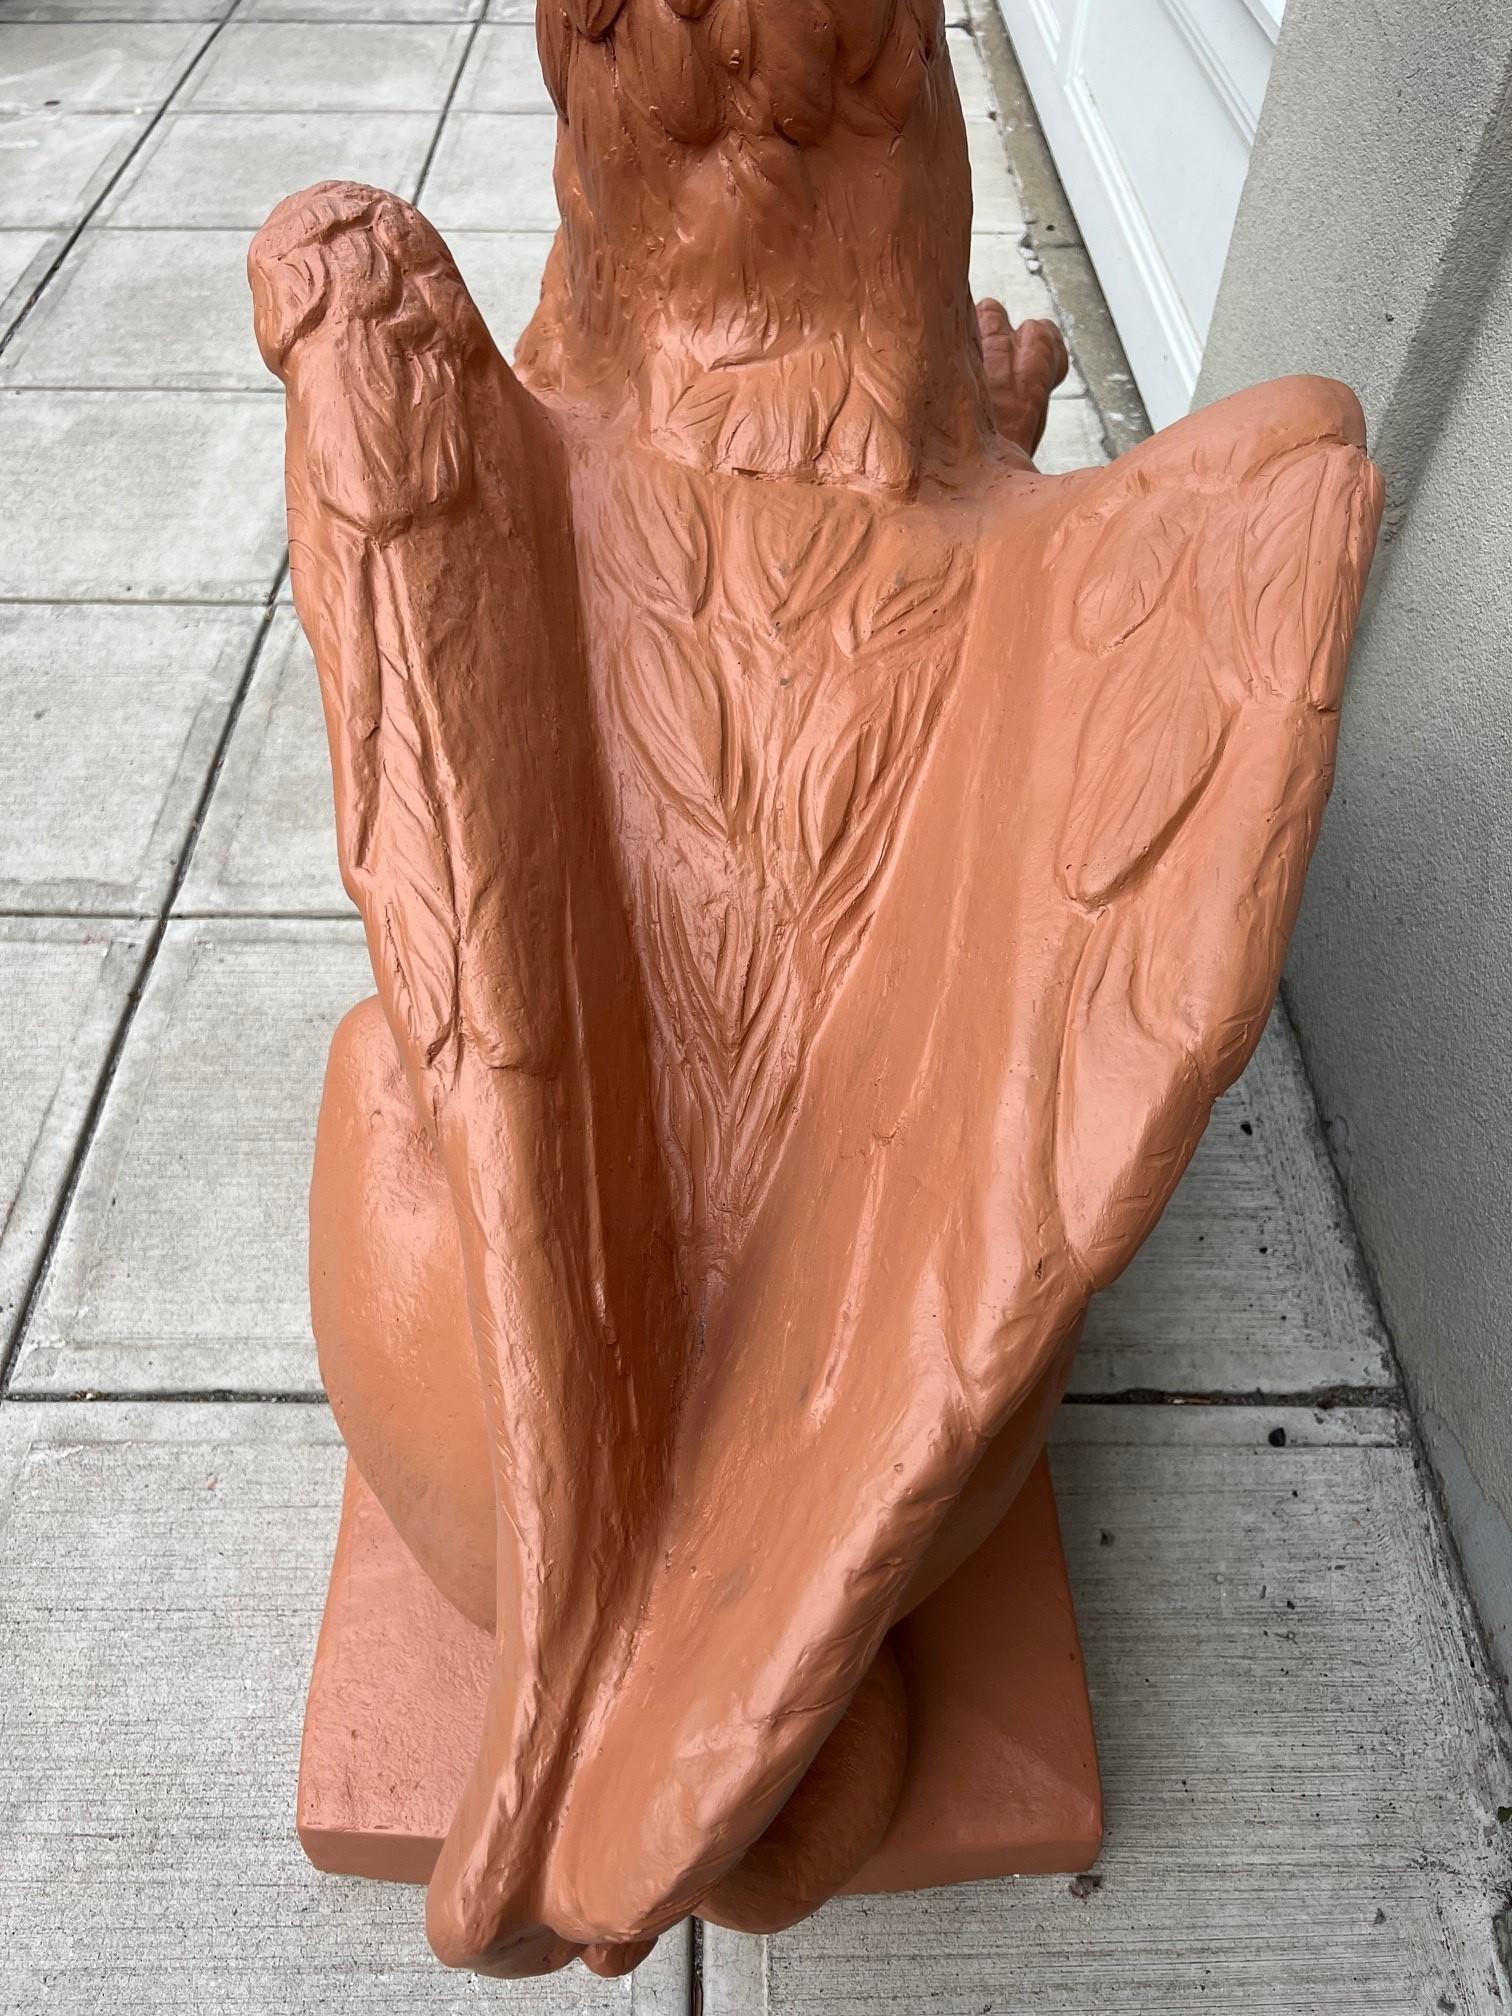 Large Fiberglass Winged Griffin or Gryphon   For Sale 1